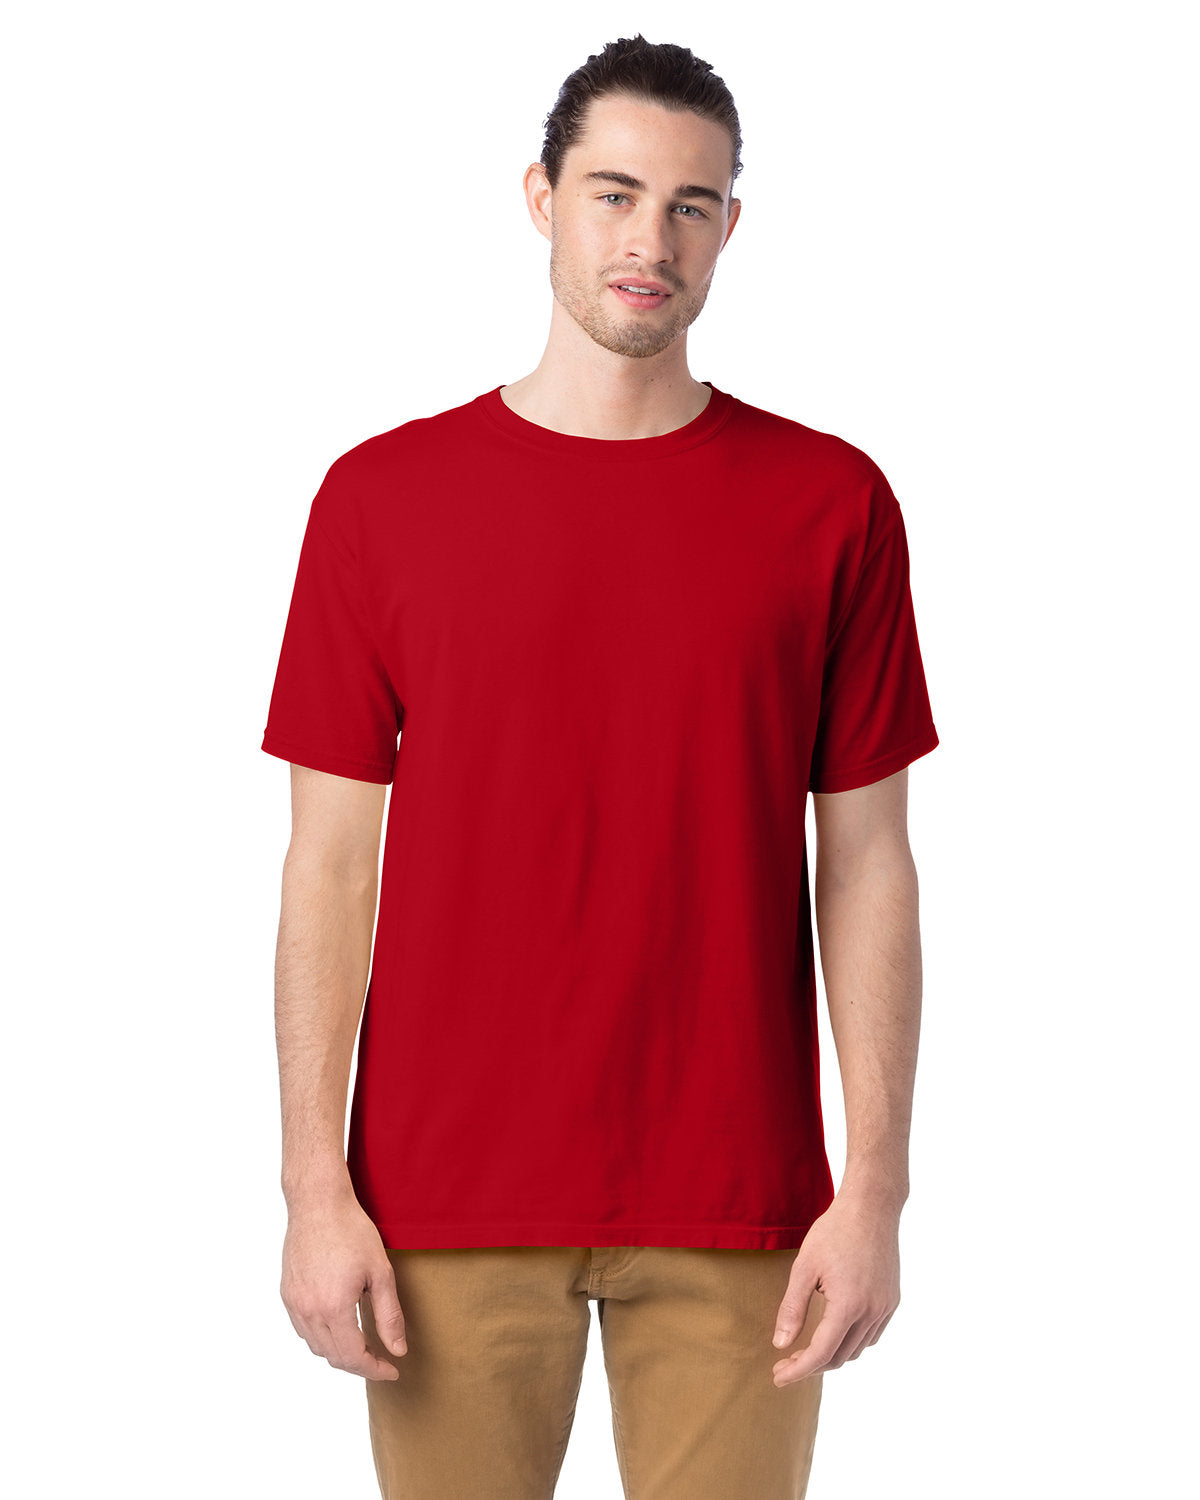 GDH100-CWH-DH-ATHLETICRED-S